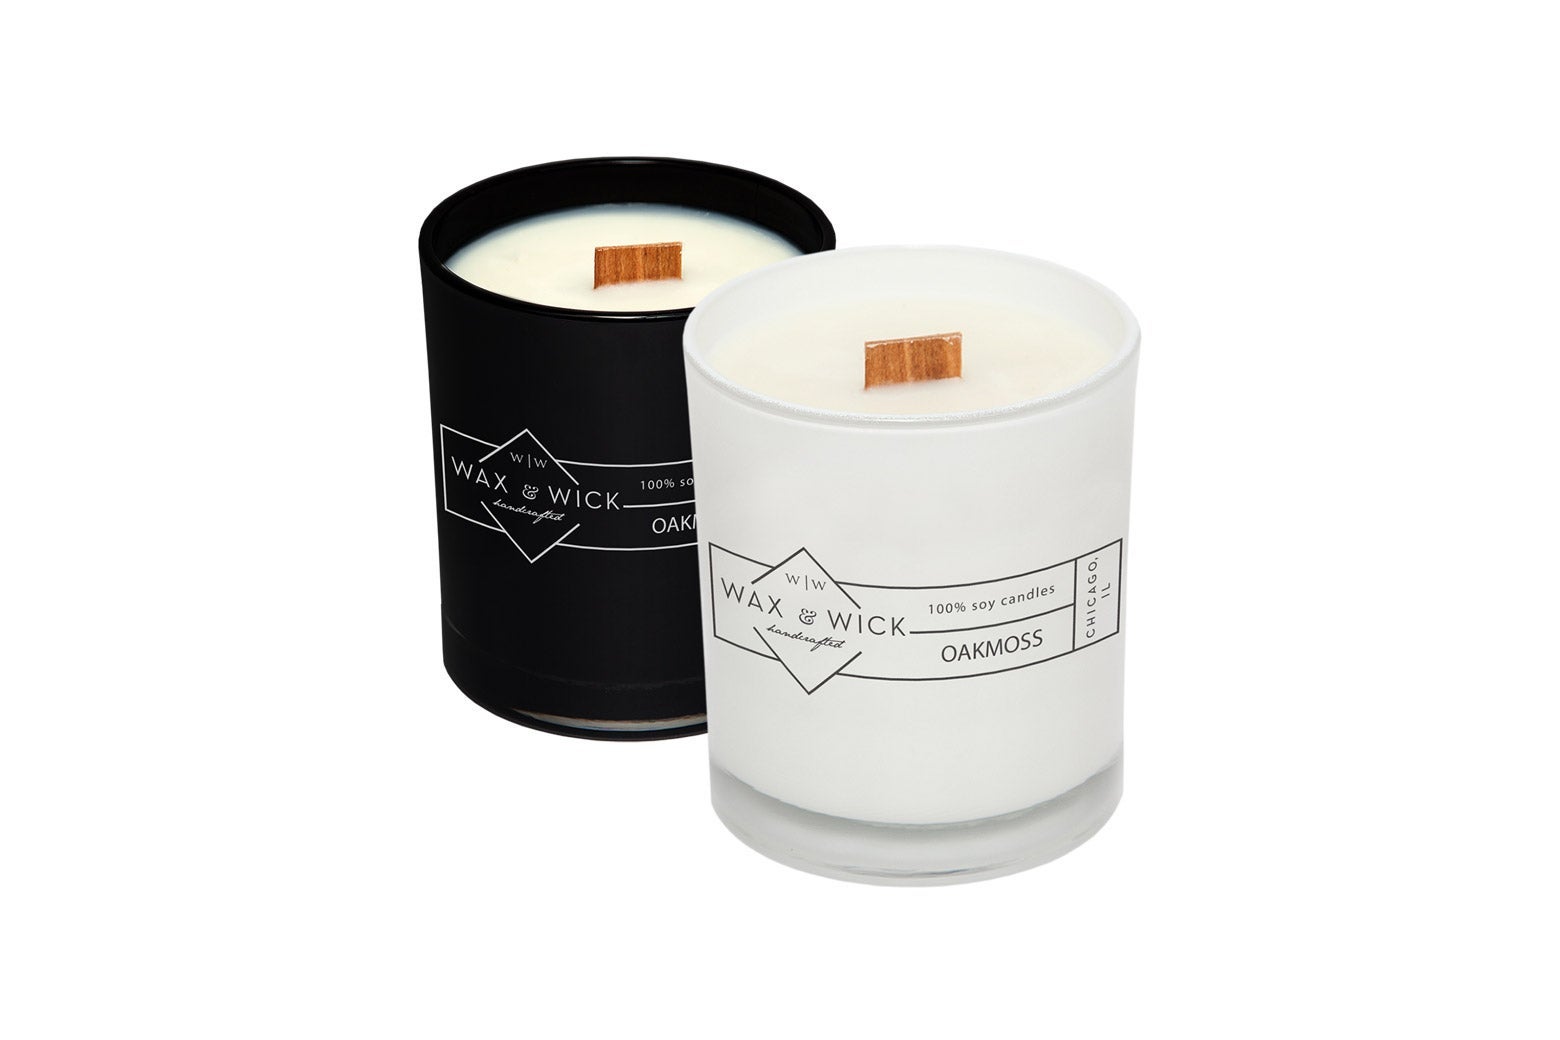 Two Wax and Wick candles, one in a black jar, one in a white jar.